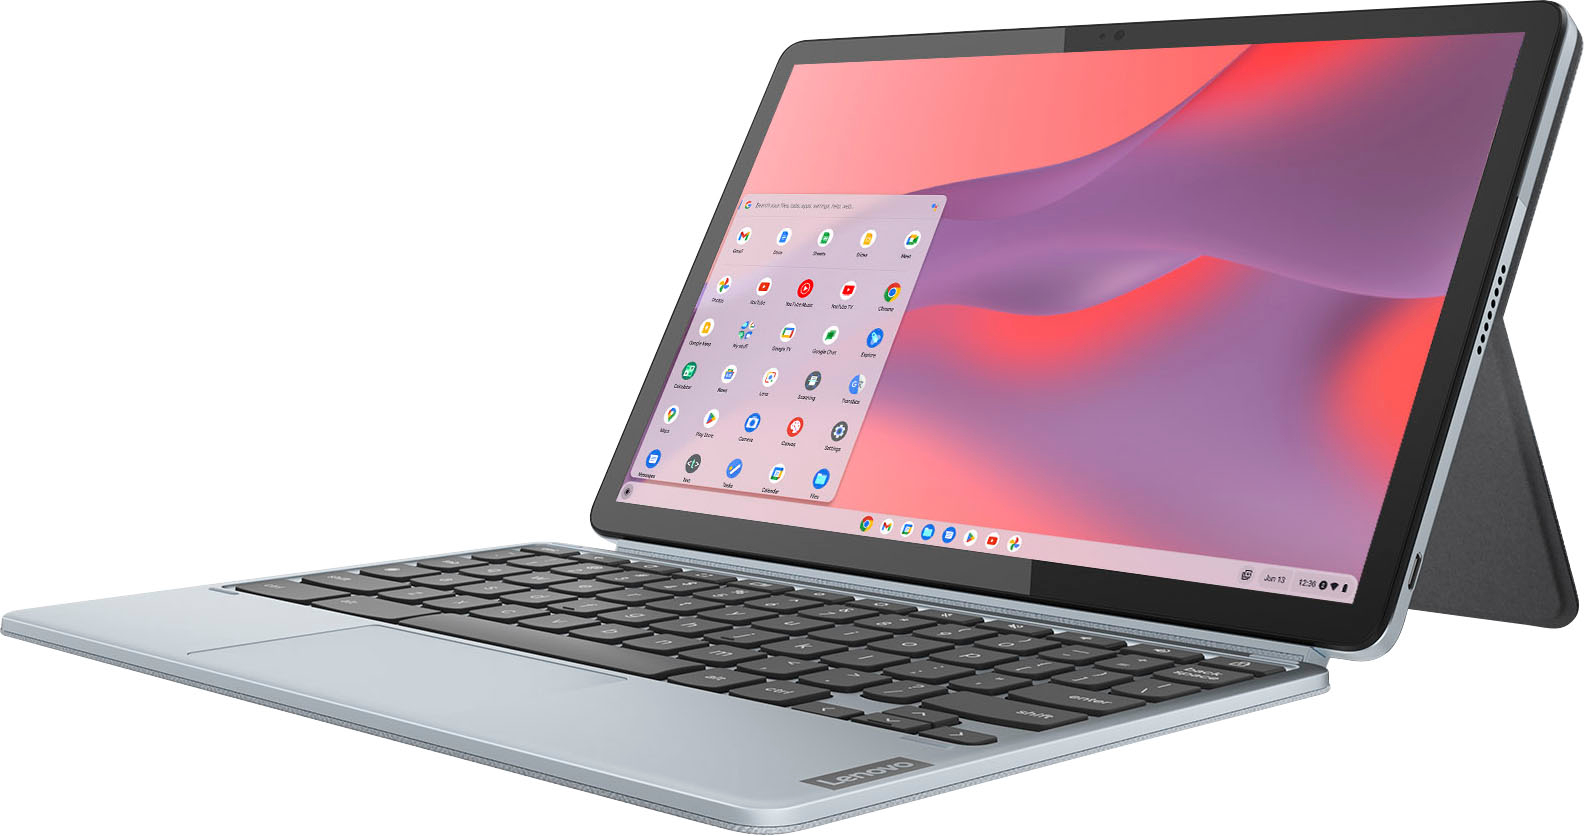 Lenovo - IdeaPad Duet 3 Chromebook - 11.0" (2000x1200) Touch 2-in-1 Tablet - Snapdragon 7cG2 - 4G RAM - 128G eMMC - with Keyboard - Misty Blue